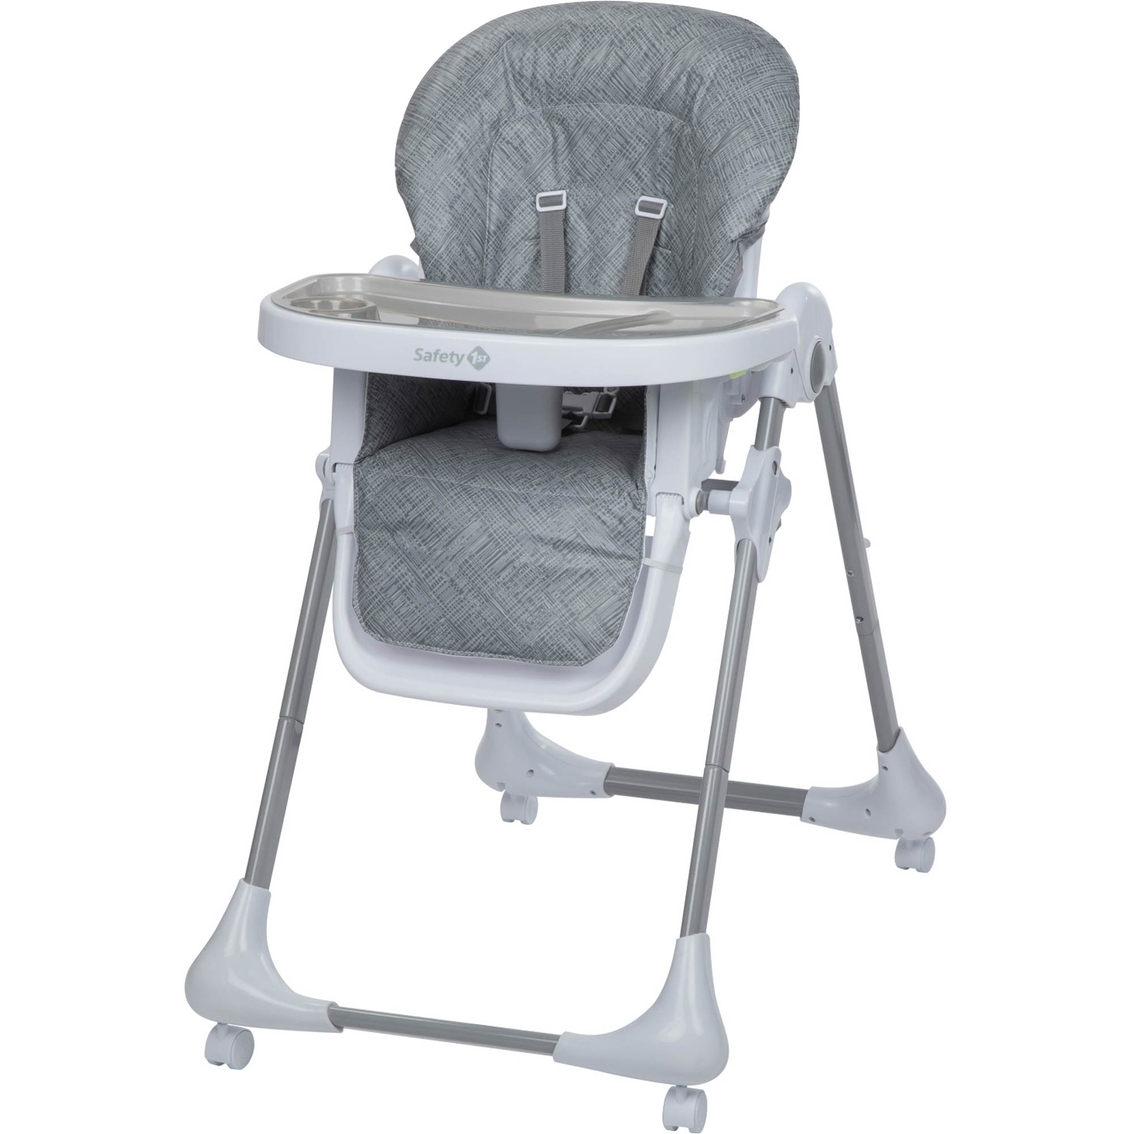 Safety 1st 3-in-1 Grow and Go High Chair - Image 2 of 10